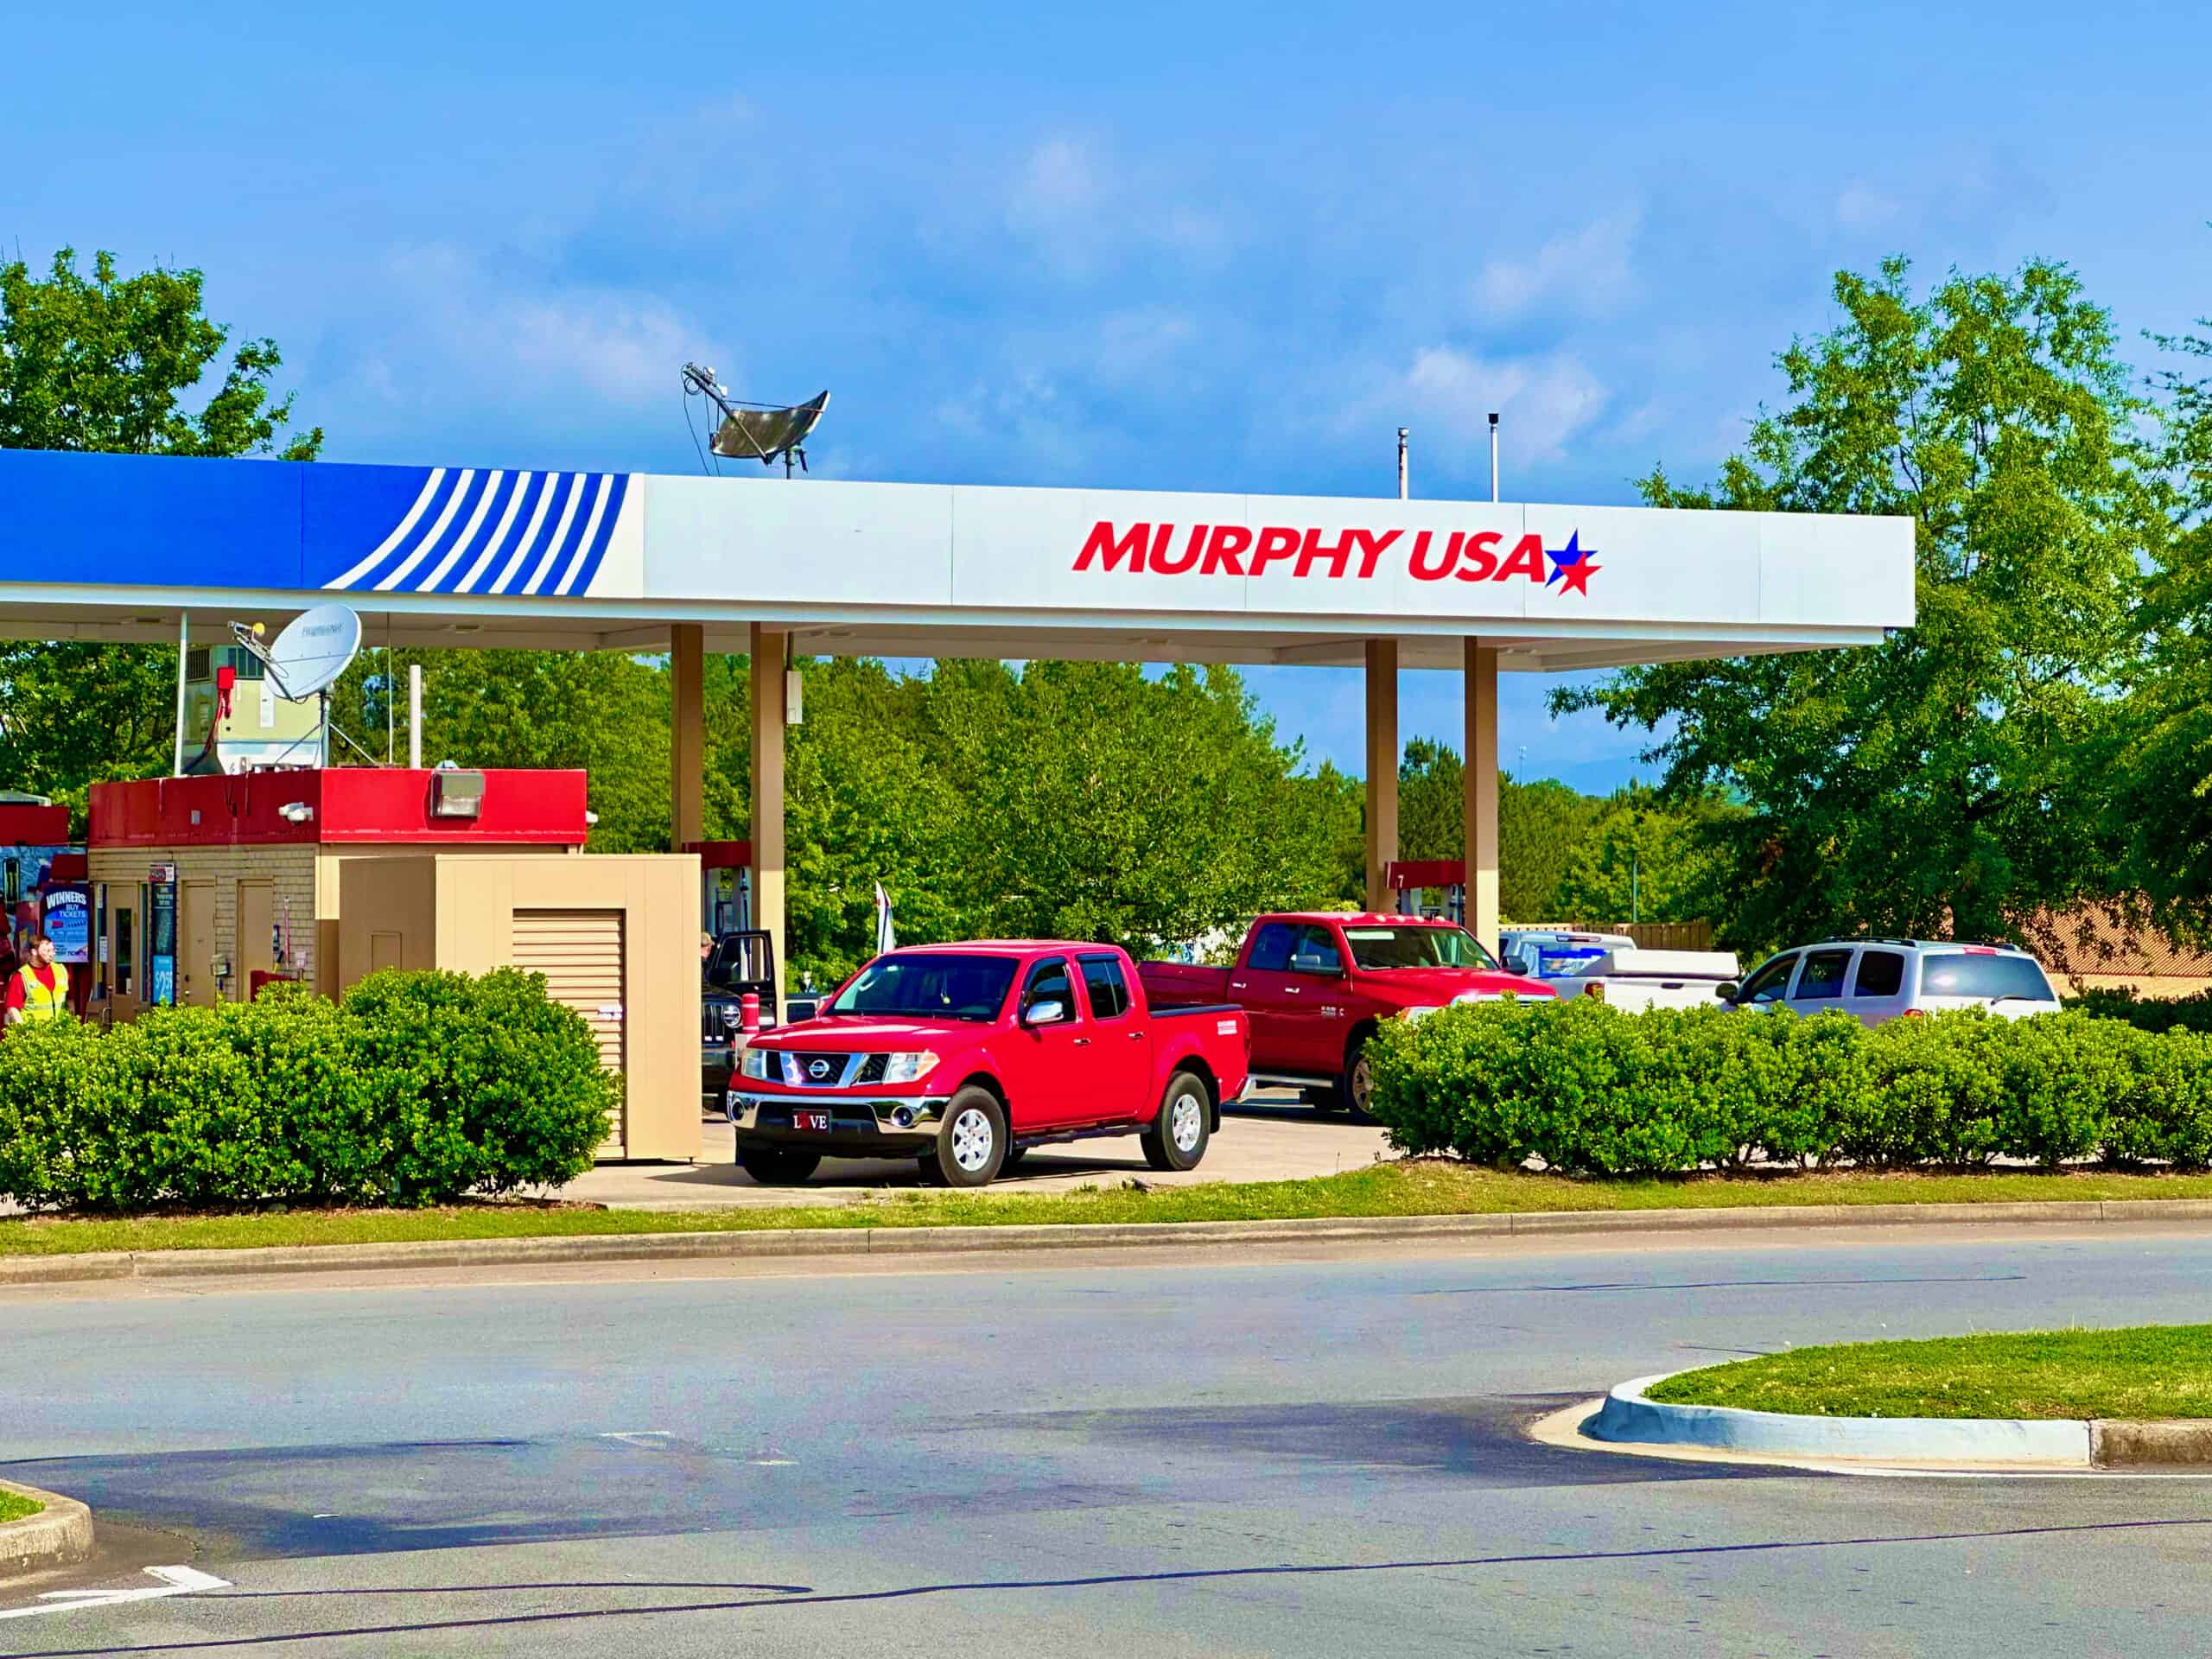 Murphy USA gas station by Harrison Keely